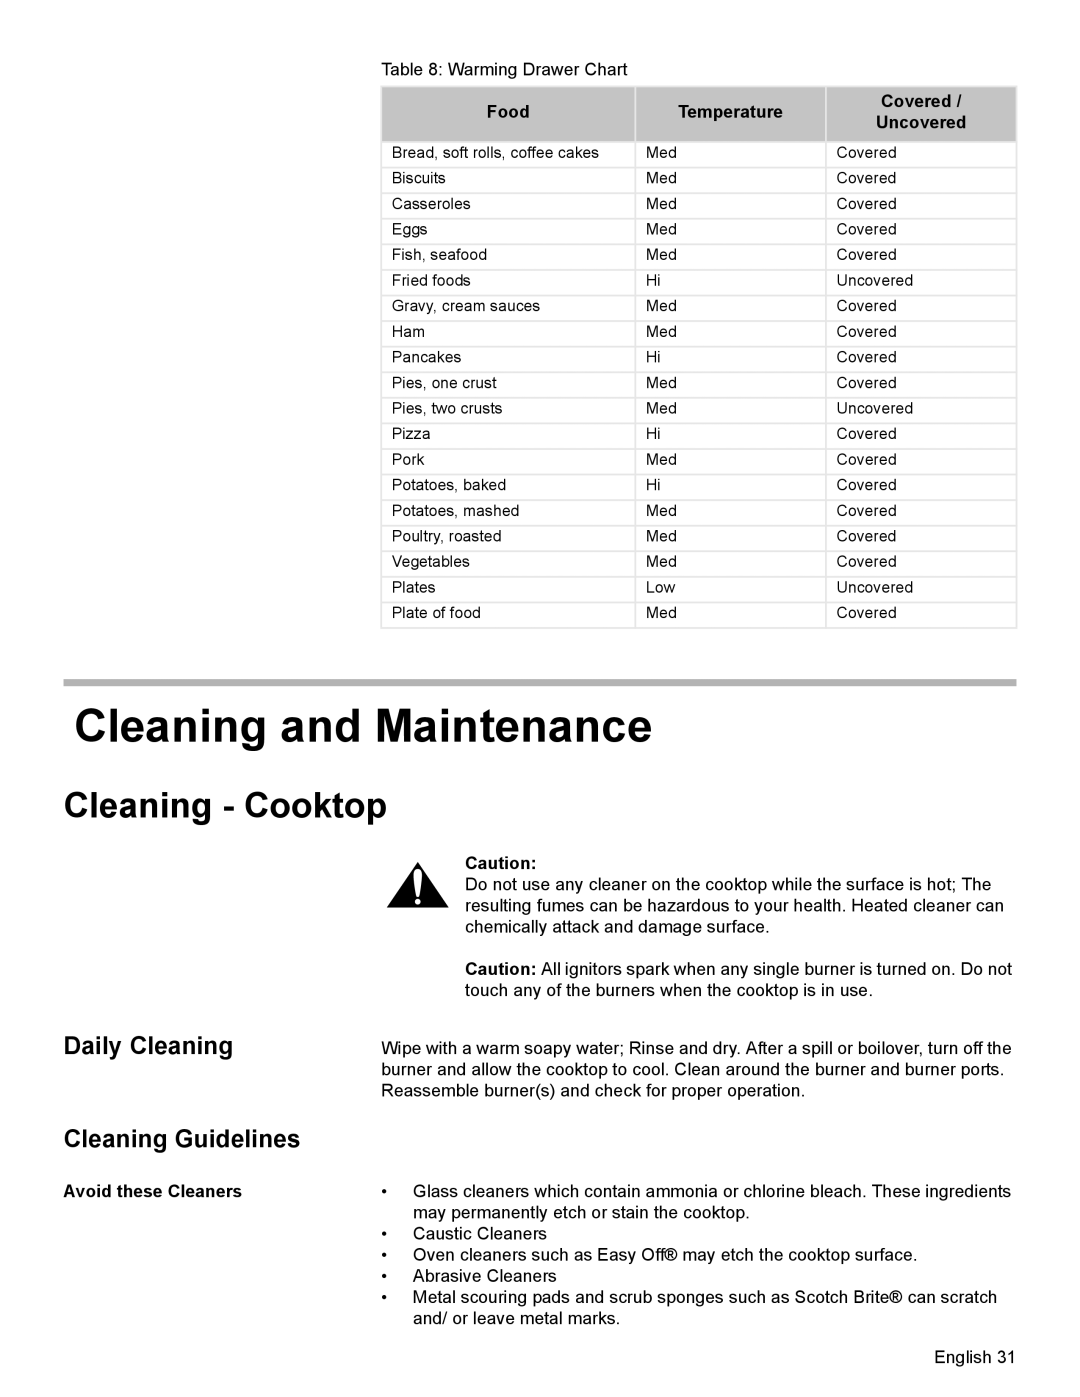 Bosch Appliances HGS7282UC manual Cleaning and Maintenance, Cleaning - Cooktop, Daily Cleaning, Cleaning Guidelines, Food 